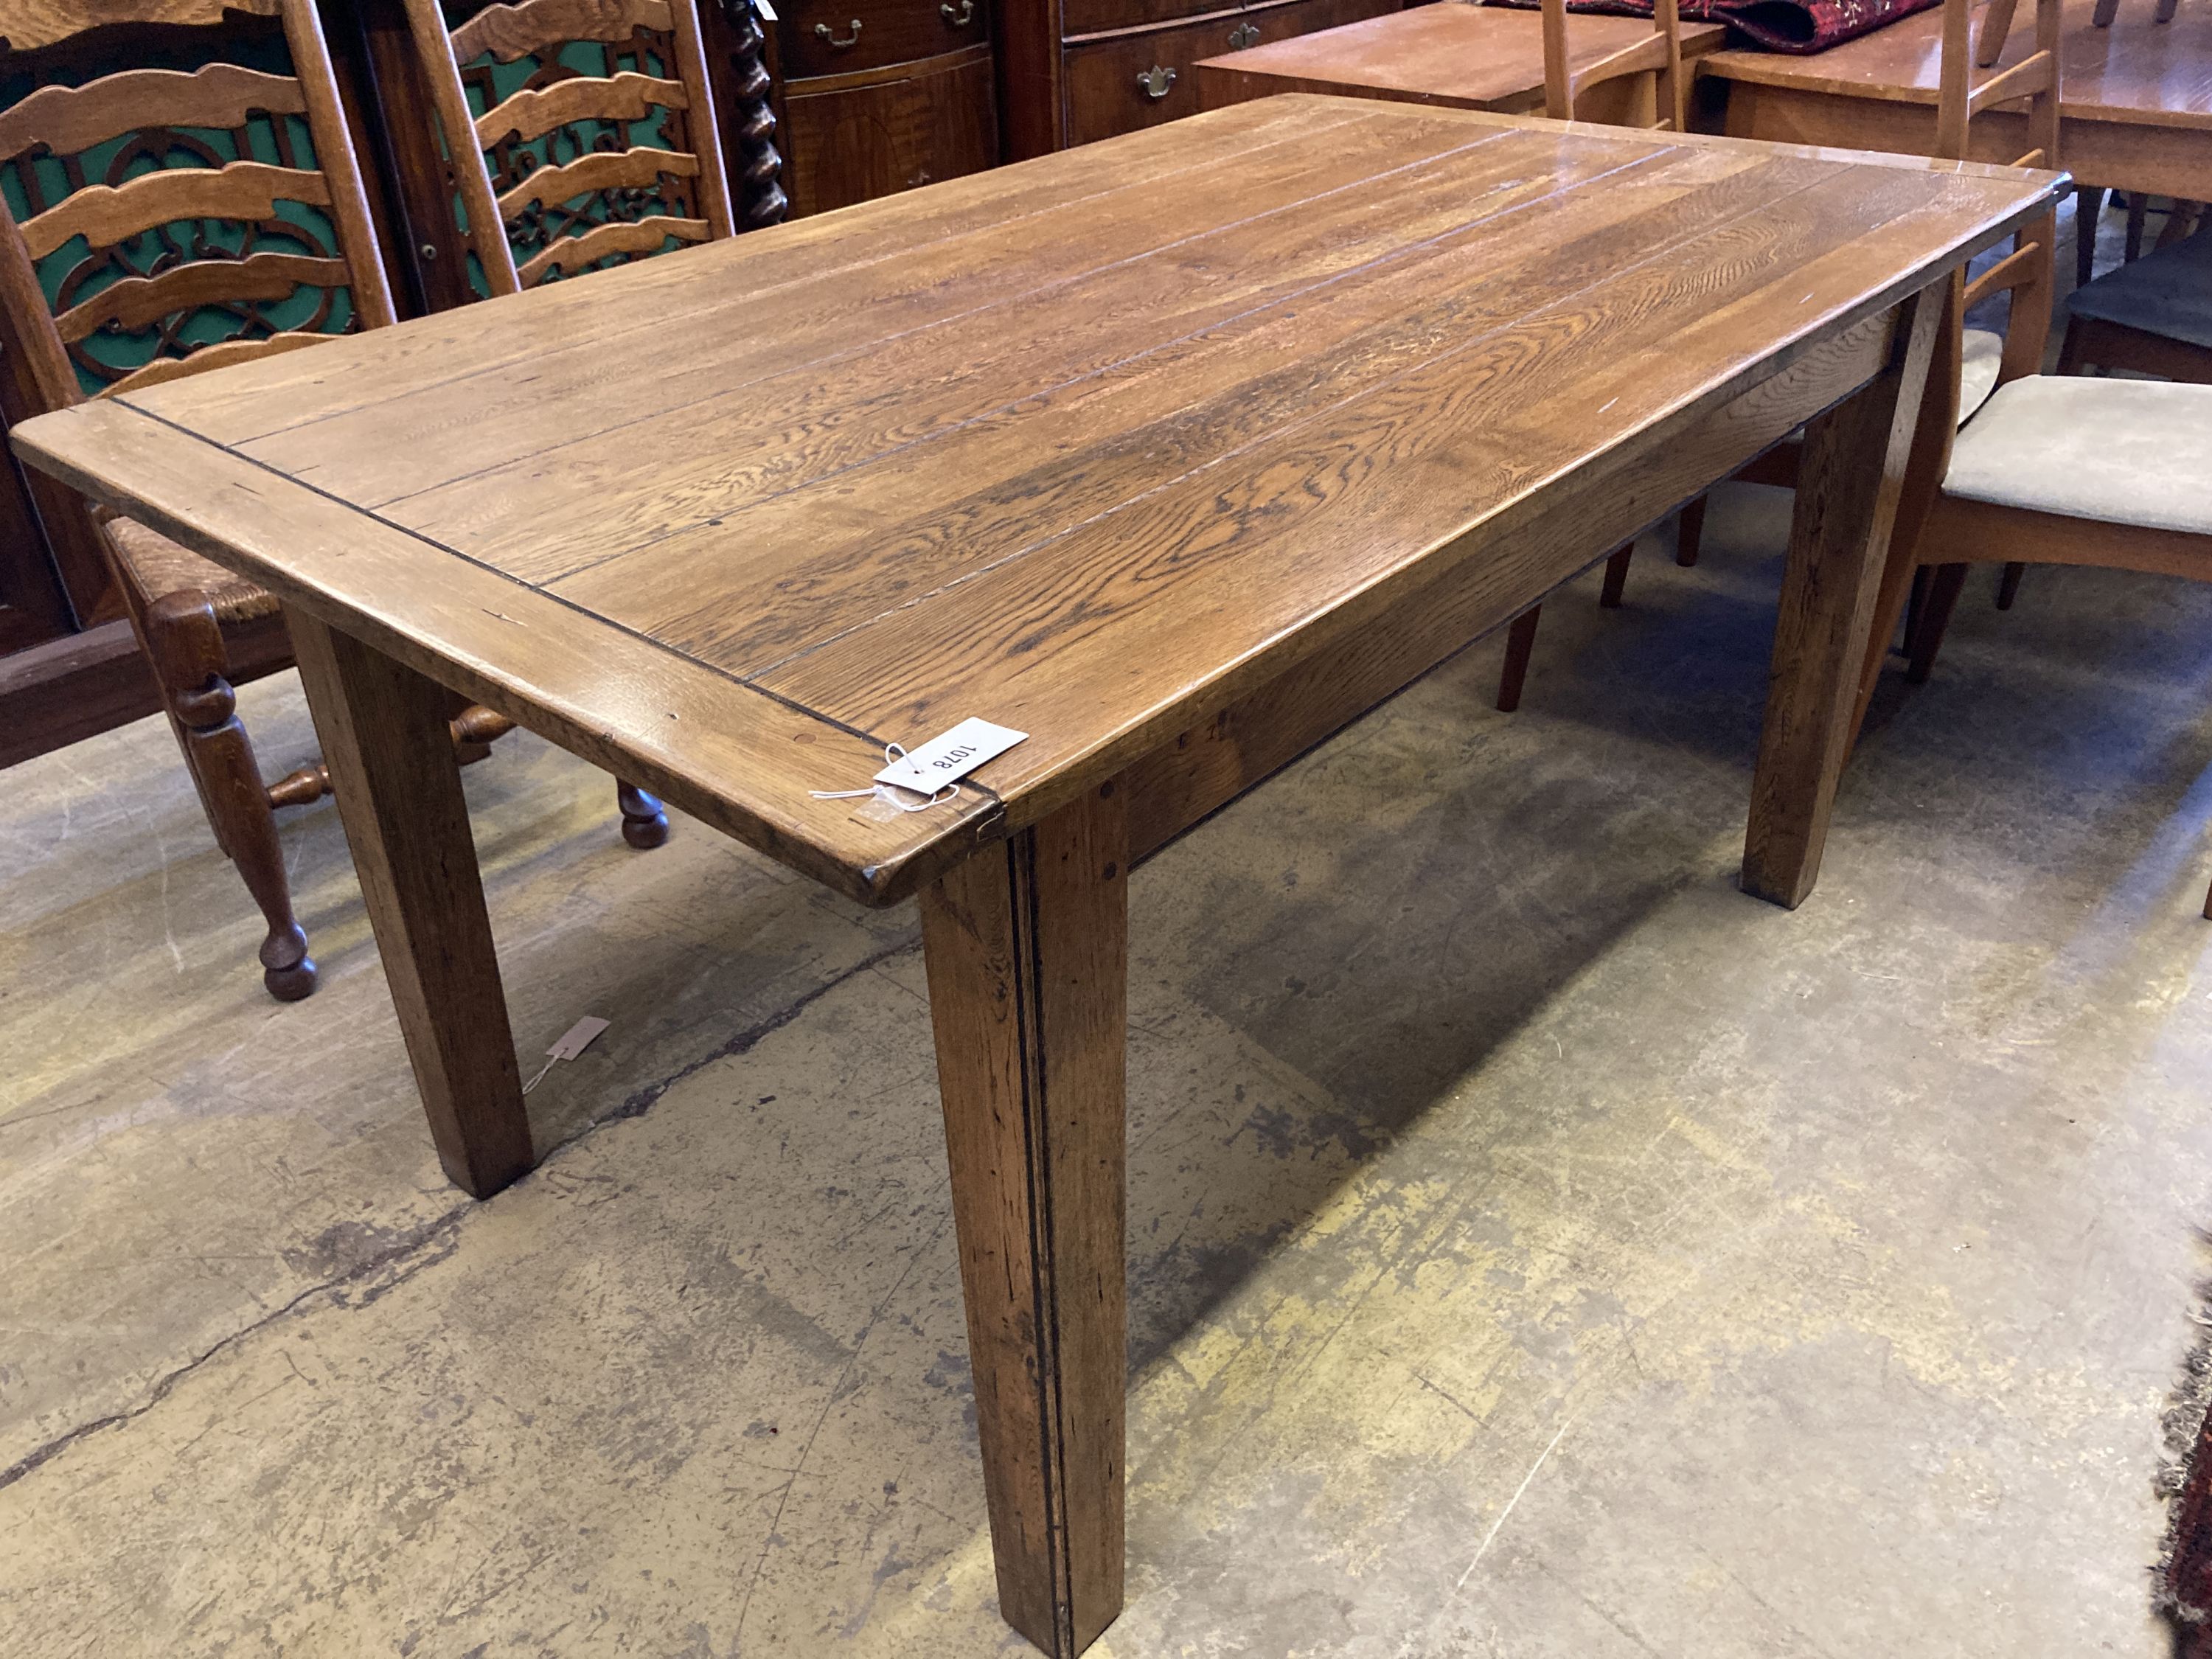 A 19th century style rectangular oak dining table with planked top, length 153cm, depth 90cm, height